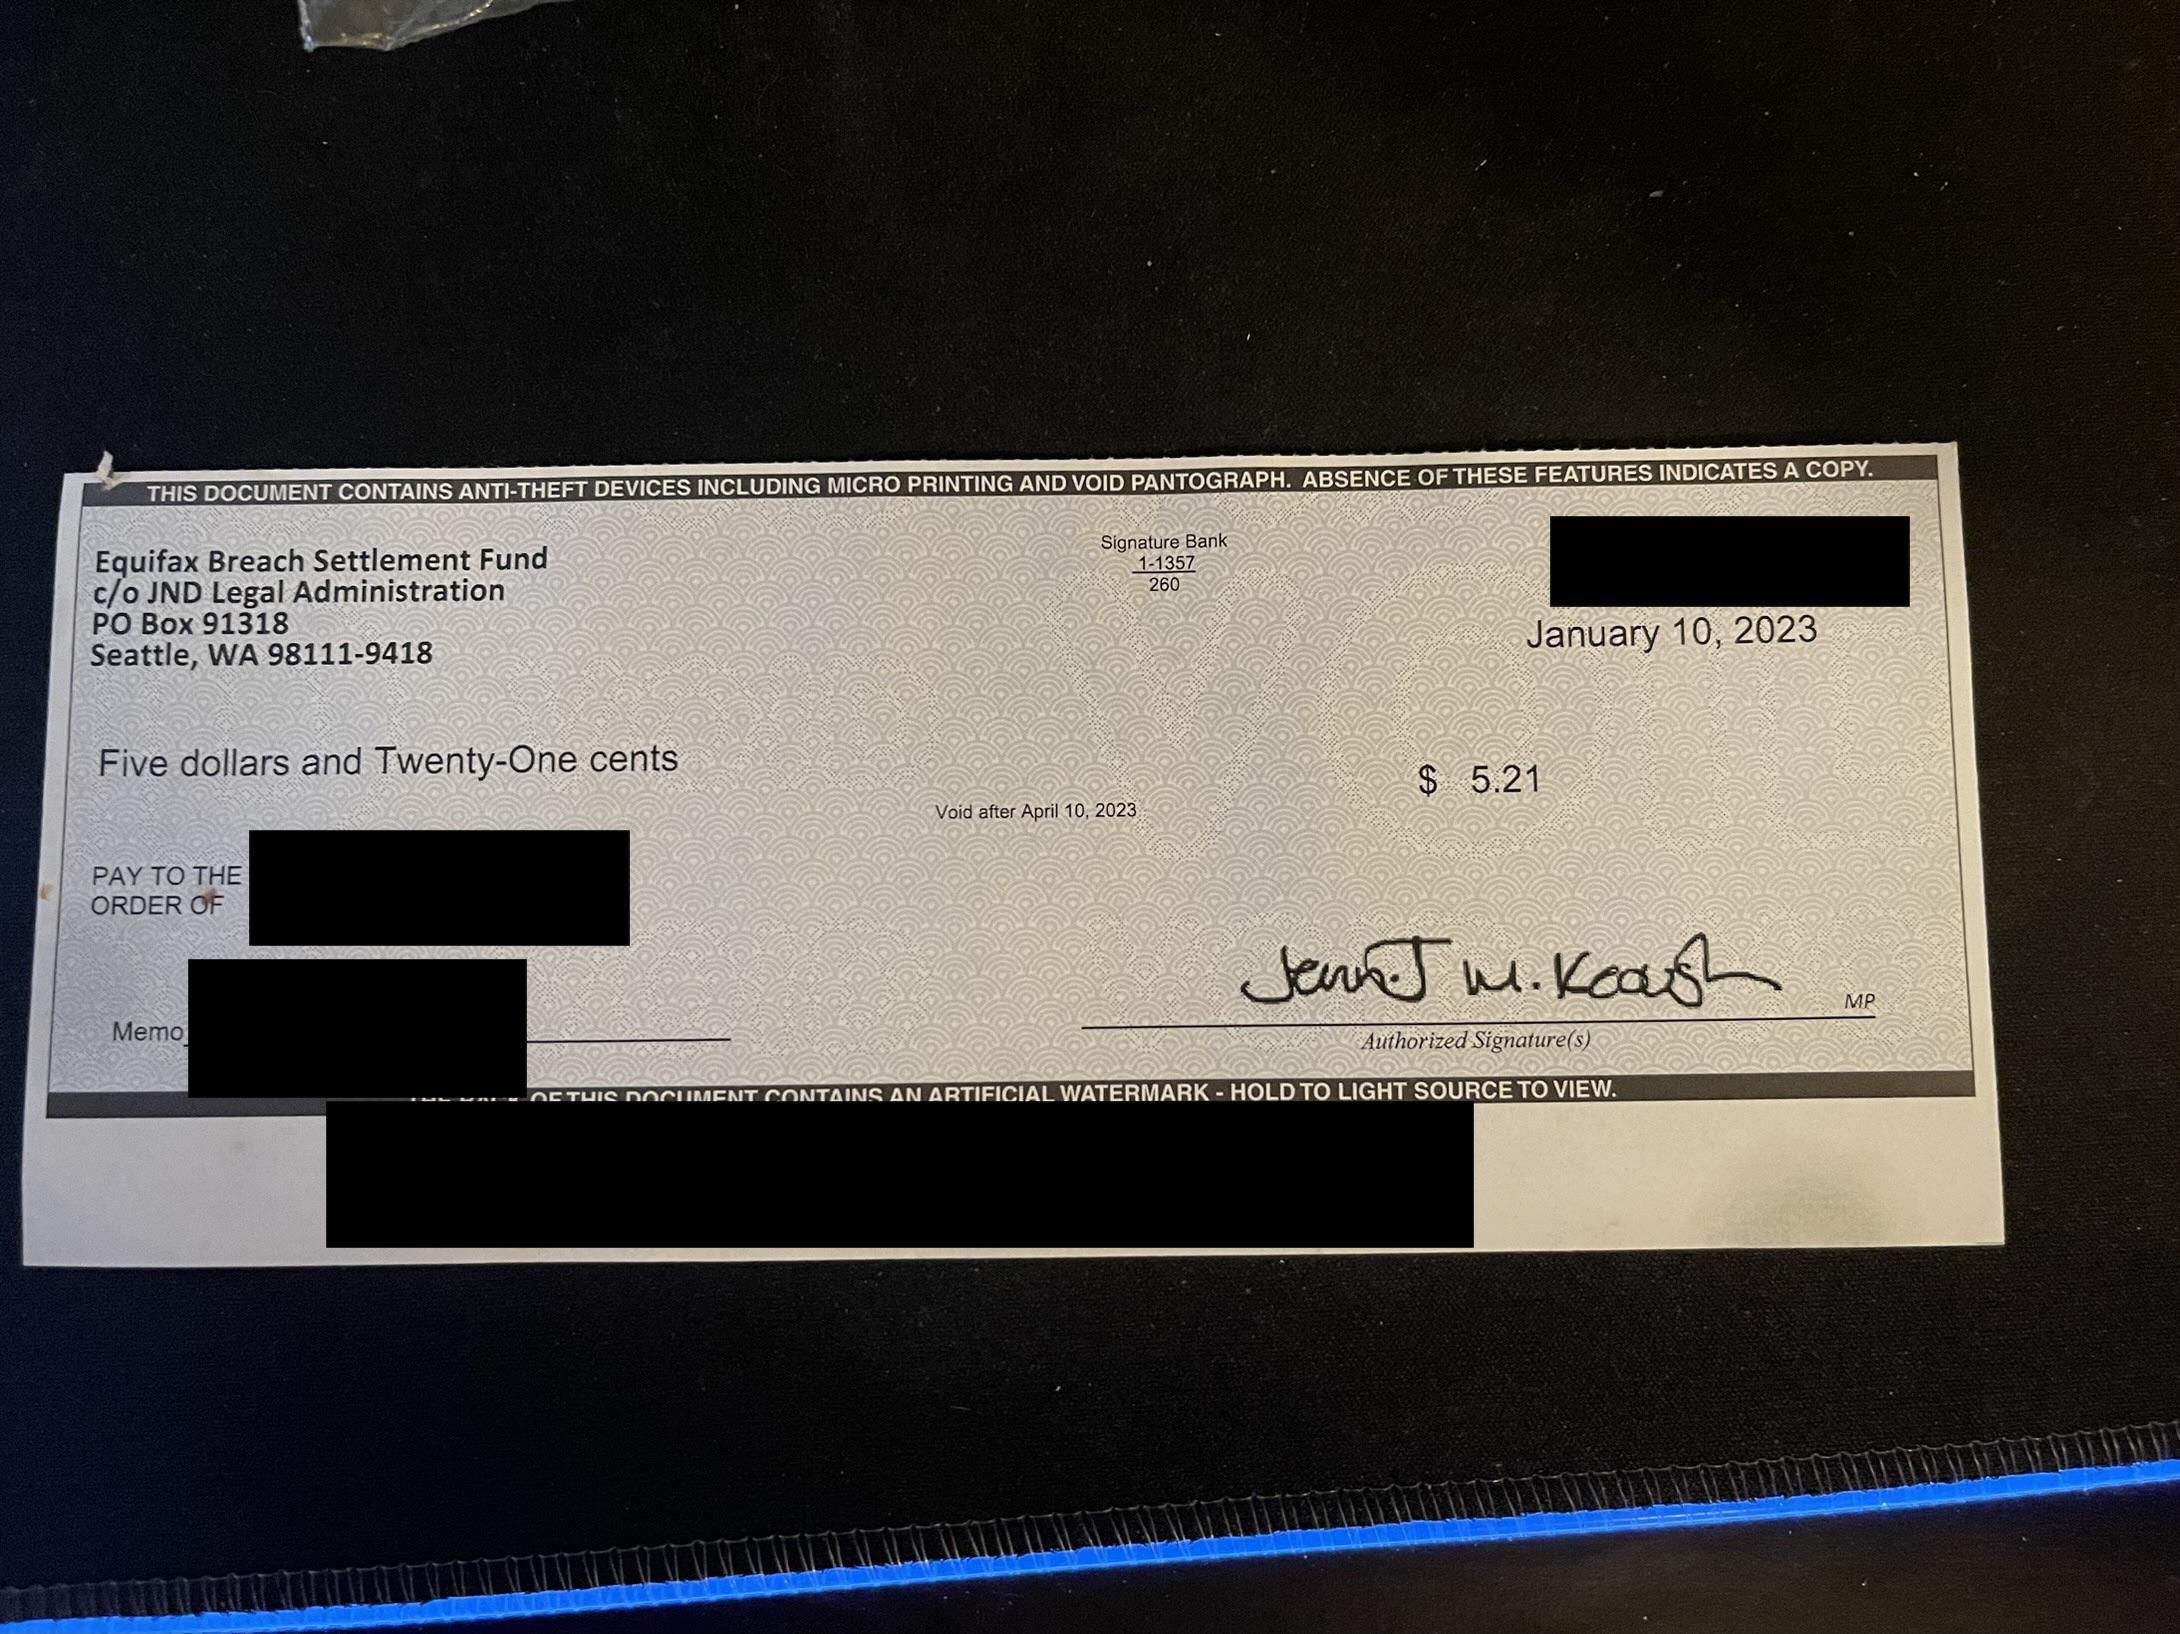 2019 they said we could get $125 to $250 for the equifax breach. Got my settlement check! So excited!